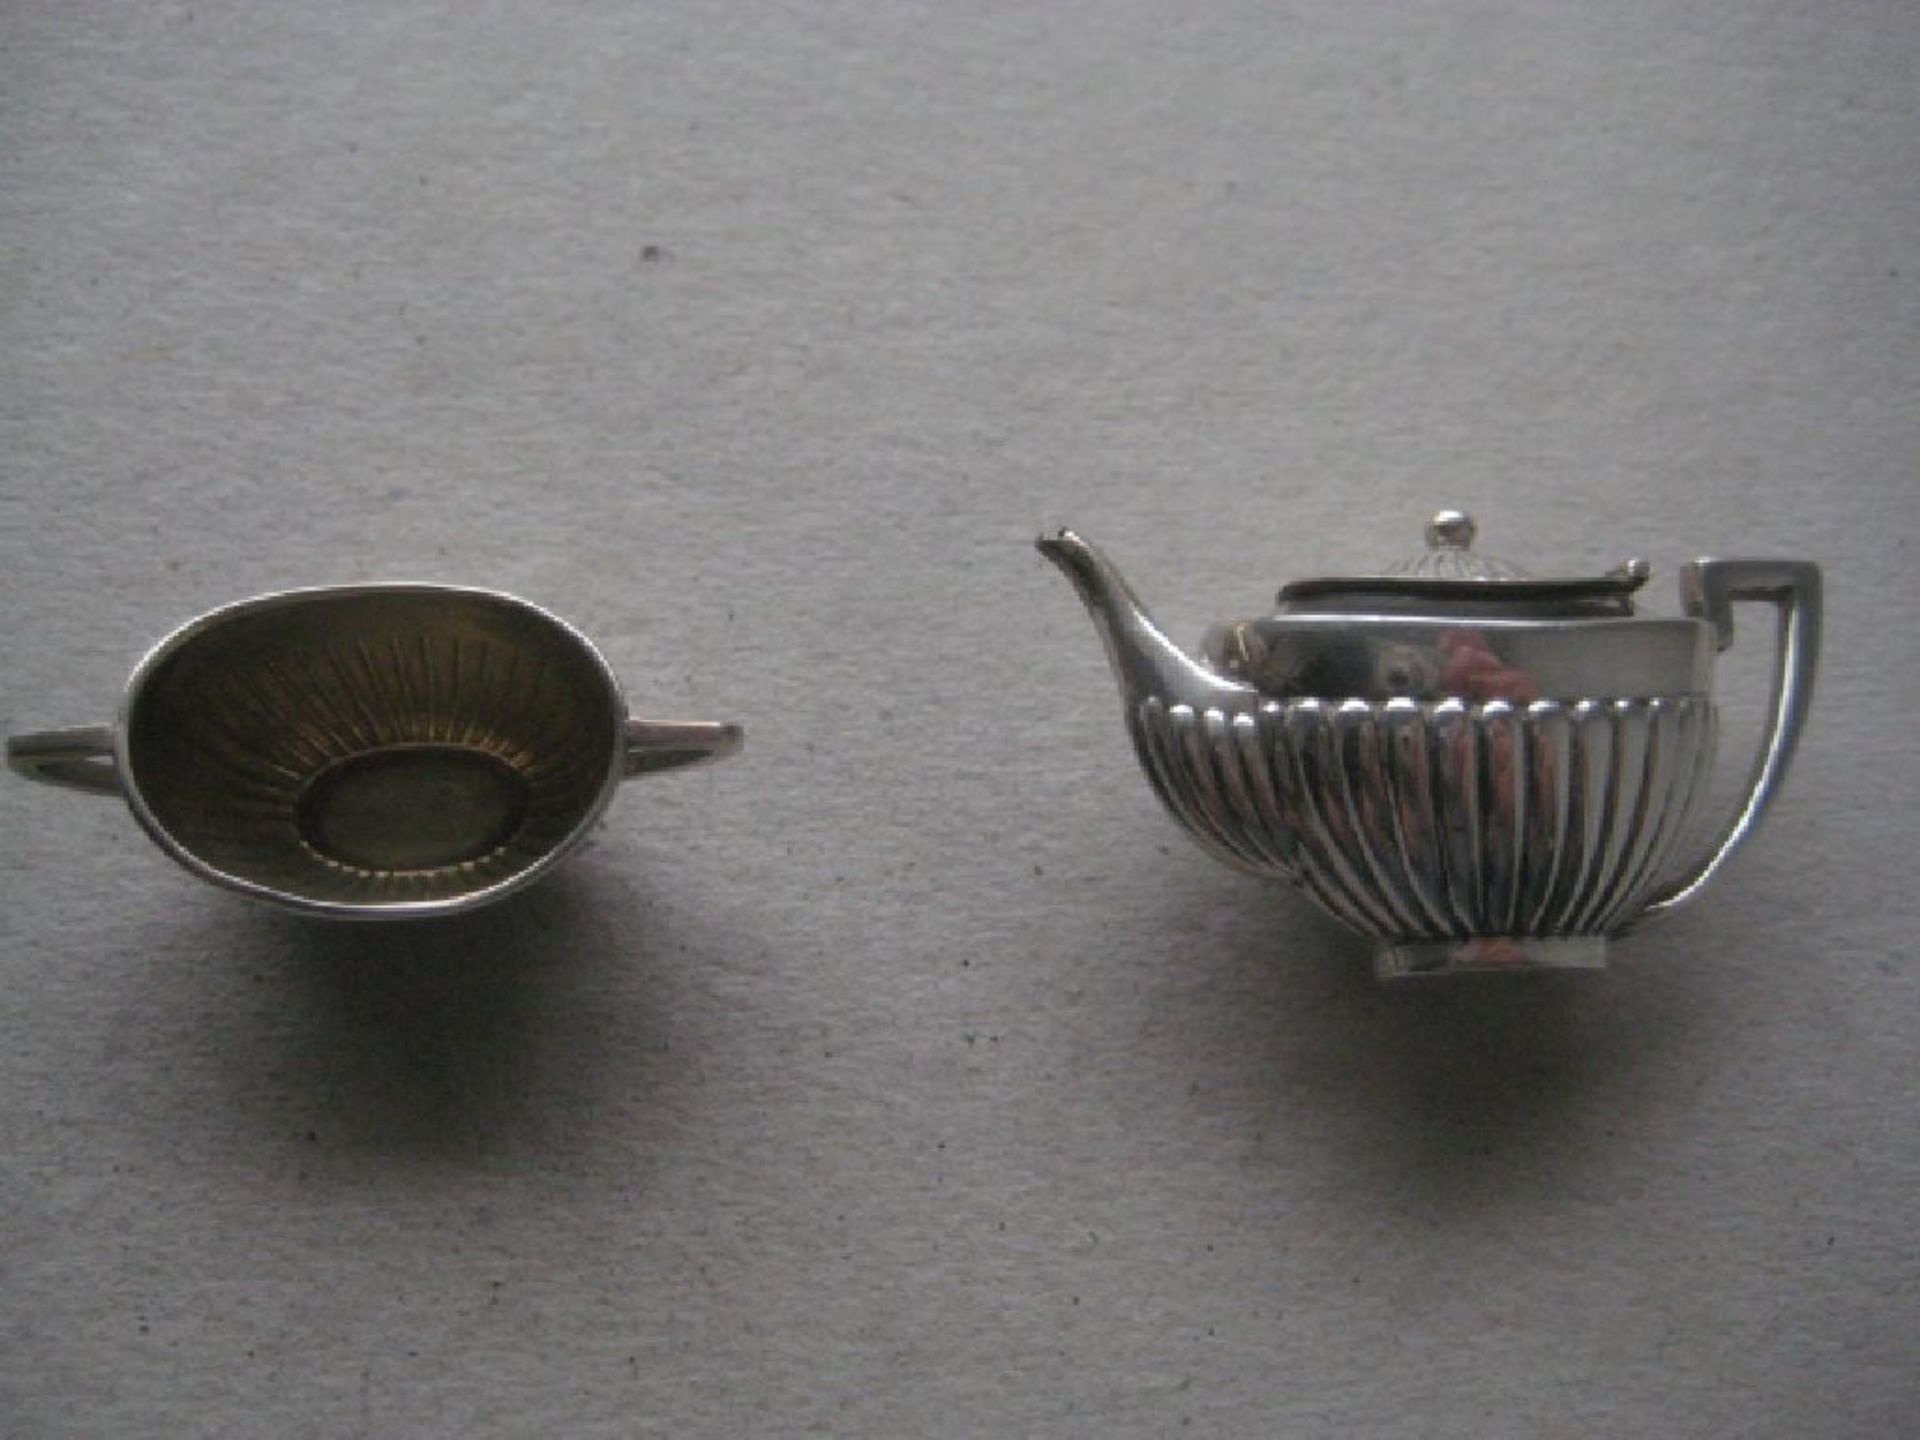 Antique Miniature Silver Teapot and Sugar Bowl, Tray Set - Image 13 of 15